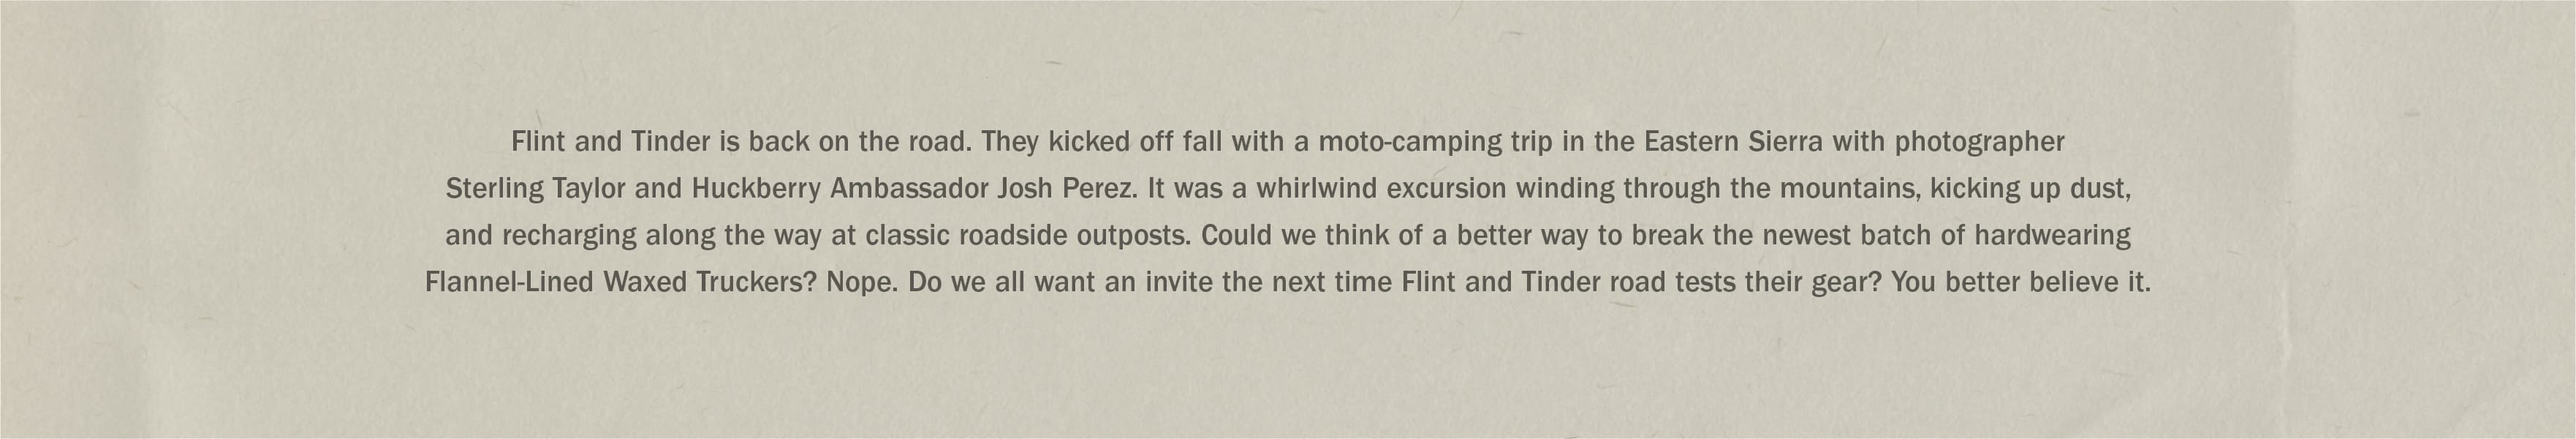 Flint and Tinder is back on the road. They kicked off fall with a moto-camping trip in the Eastern Sierra with photographer Sterling Taylor and Huckberry Ambassador Josh Perez.